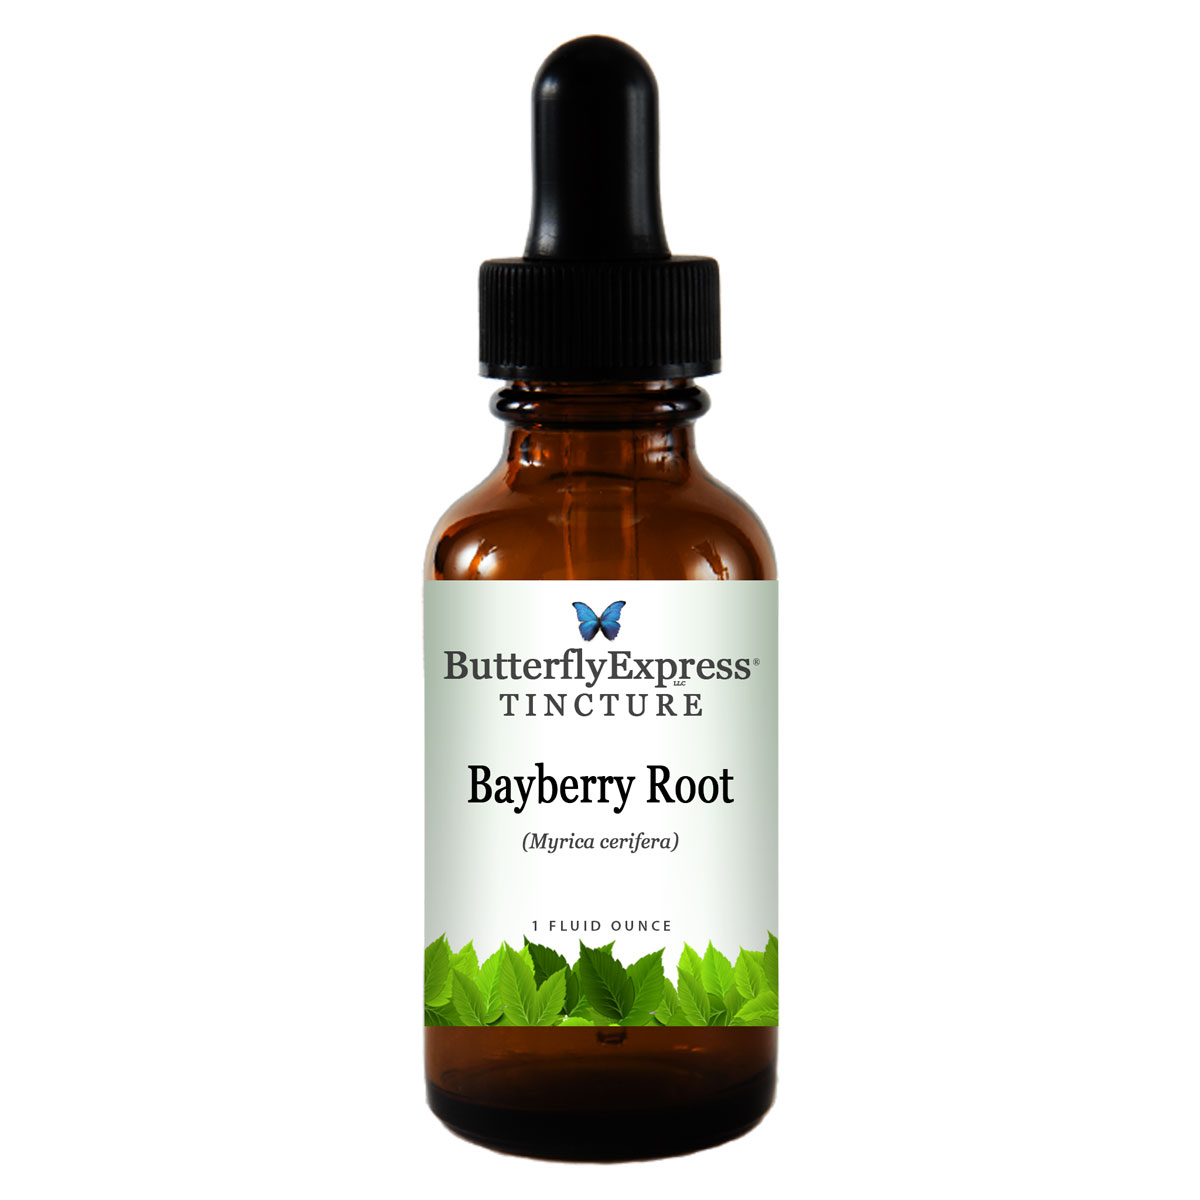 Bayberry Root Tincture